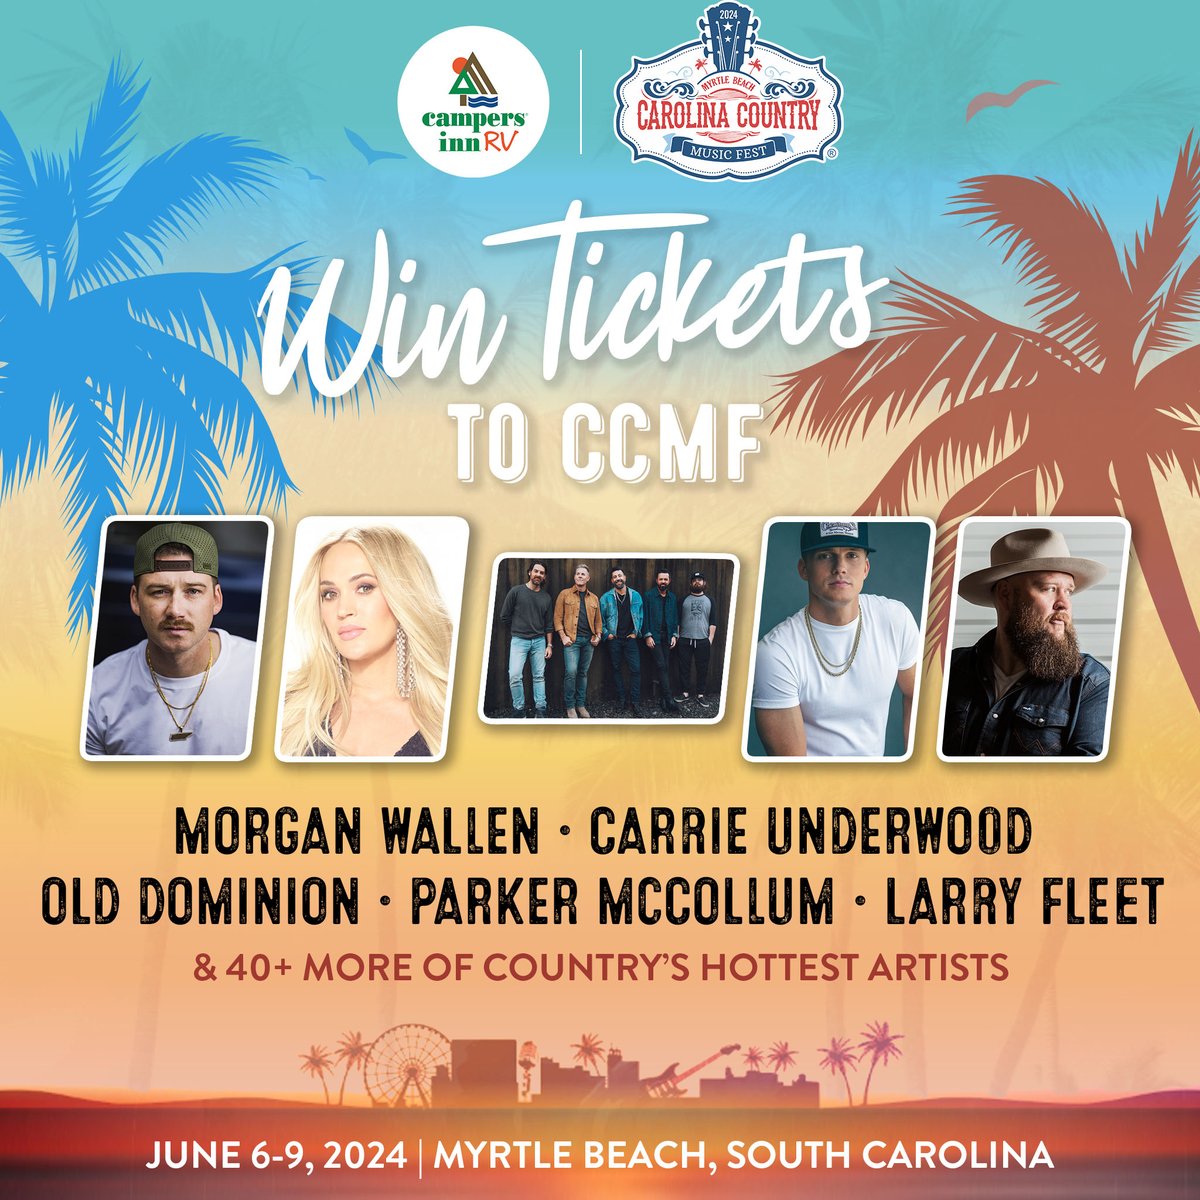 Want to win your way into @CCMFLive? Sign up with @campersinnrv for a chance to win a pair of general admission tickets to the fest! Enter here >> info.campersinn.com/ccmf-2024